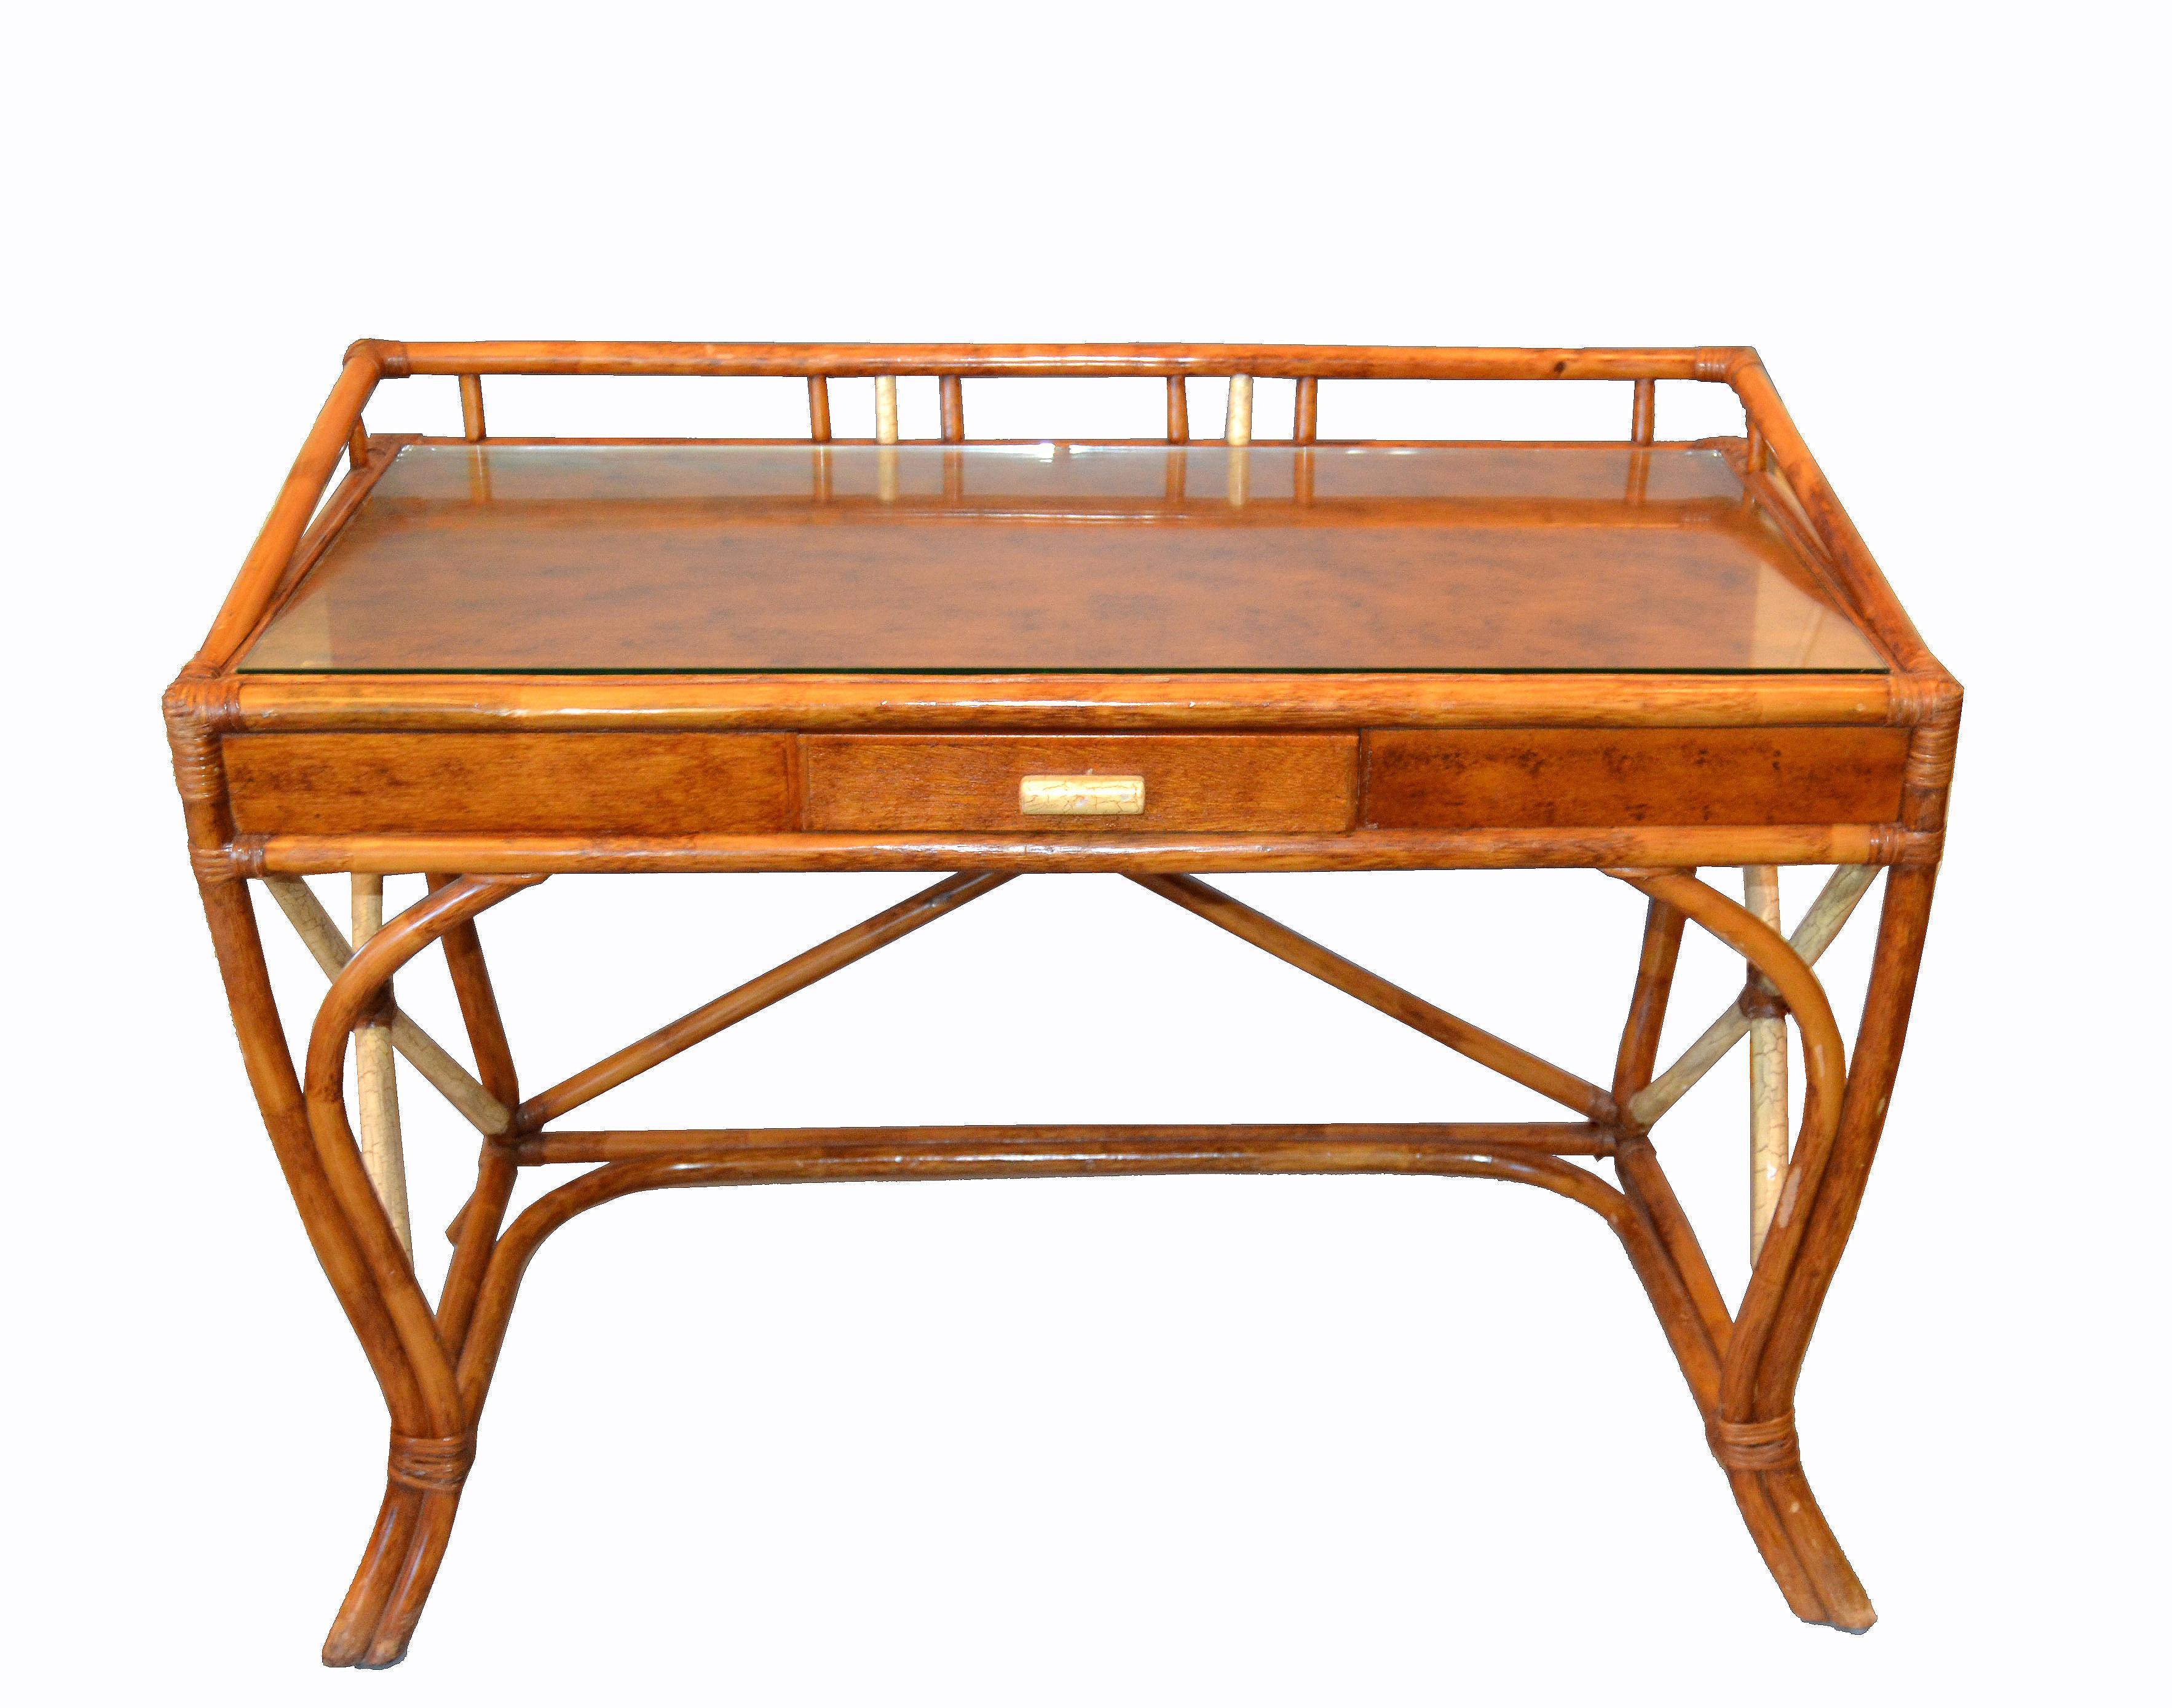 Boho chic vintage handcrafted bamboo desk, writing desk with drawer & glass top.
Stunner done with bended bamboo and crossed sides.
Firm and sturdy, not wobbly. The glass top is perfect for a smoother surface, ideal for your daily office